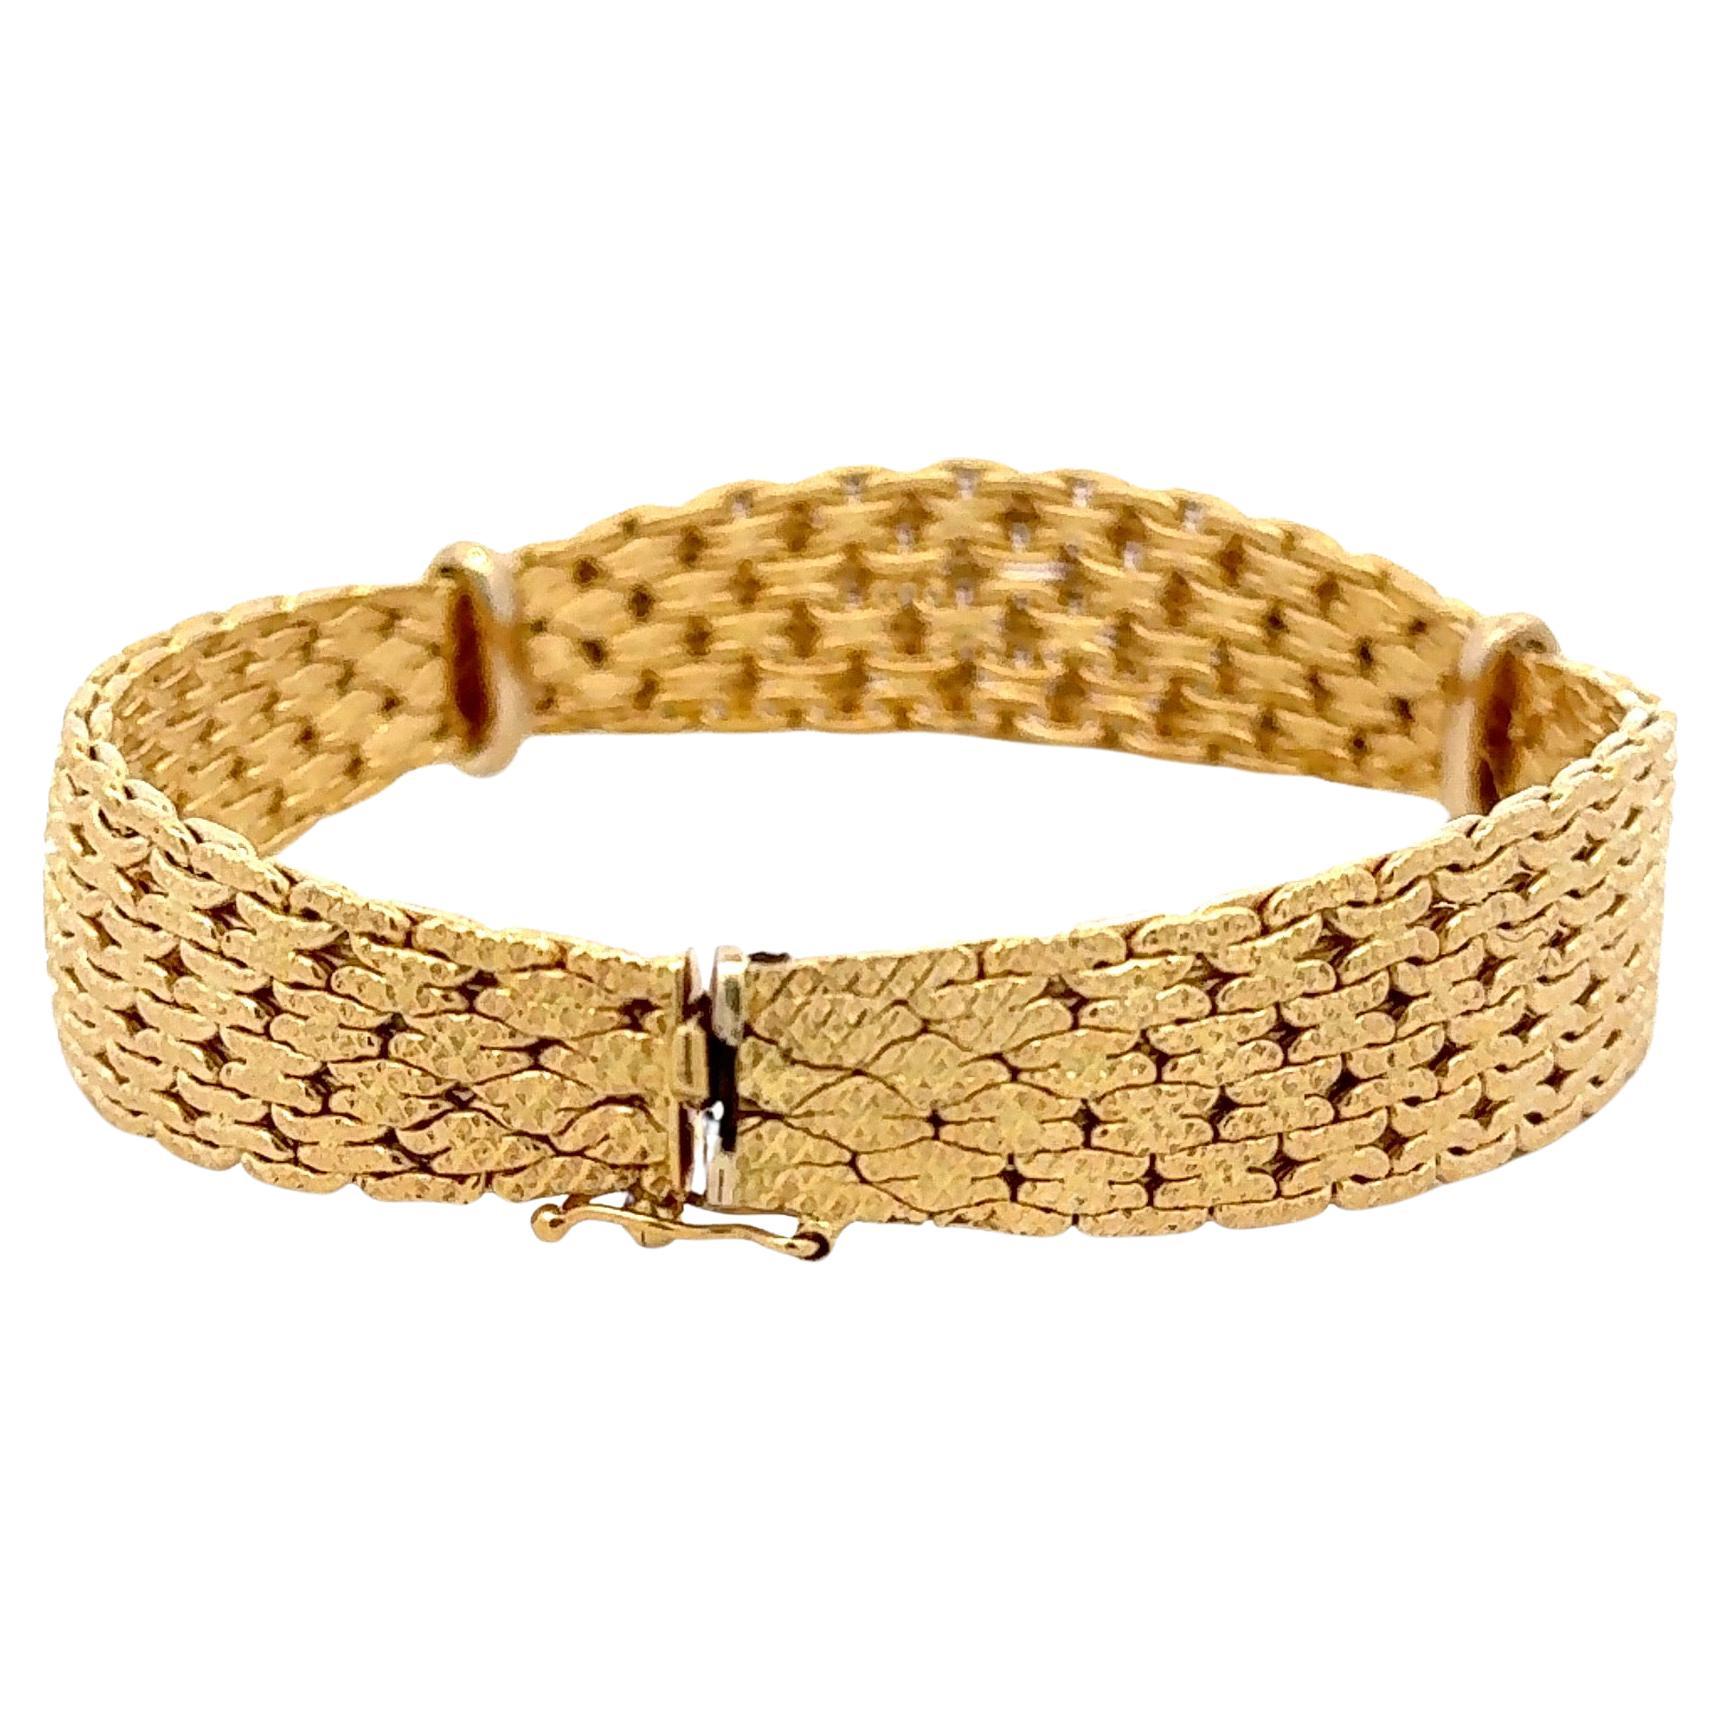 18 Karat Yellow Gold woven motif bracelet with two gold bars weighing 20.8 grams.
More gold bracelets in stock
Search Harbor Diamonds